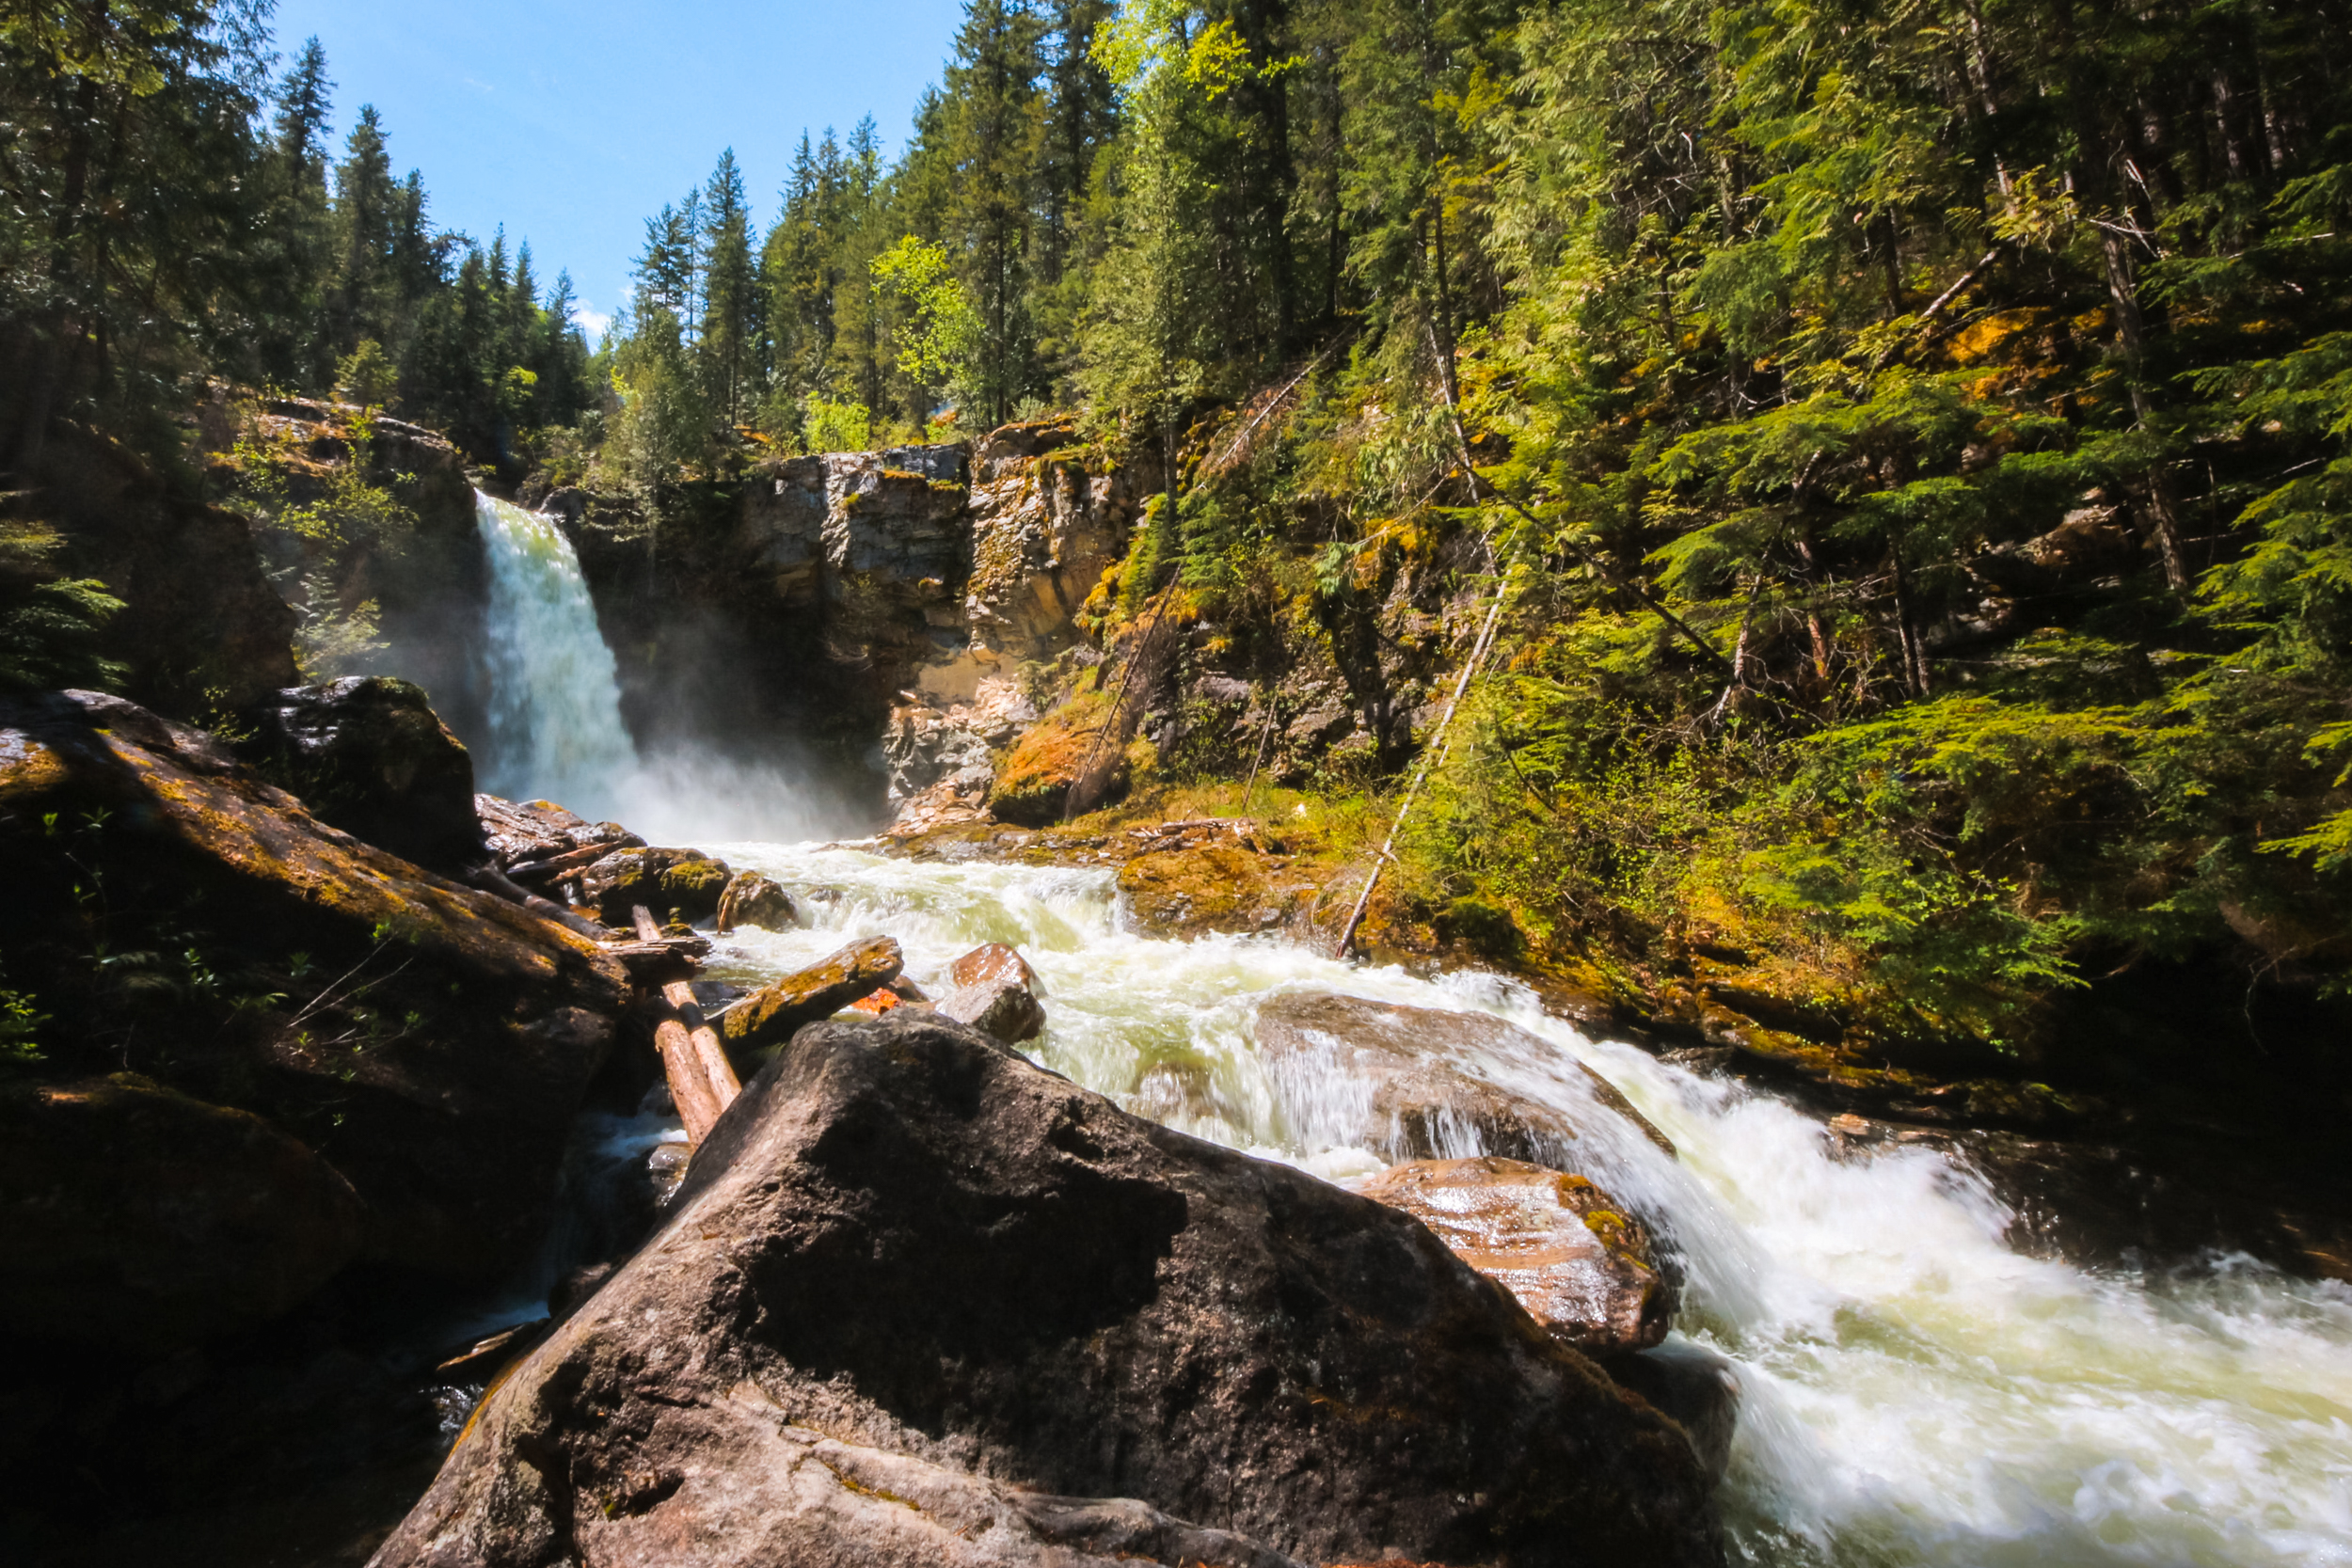 Trail Guide: Sutherland Falls in Blanket Creek Provincial Park, BC